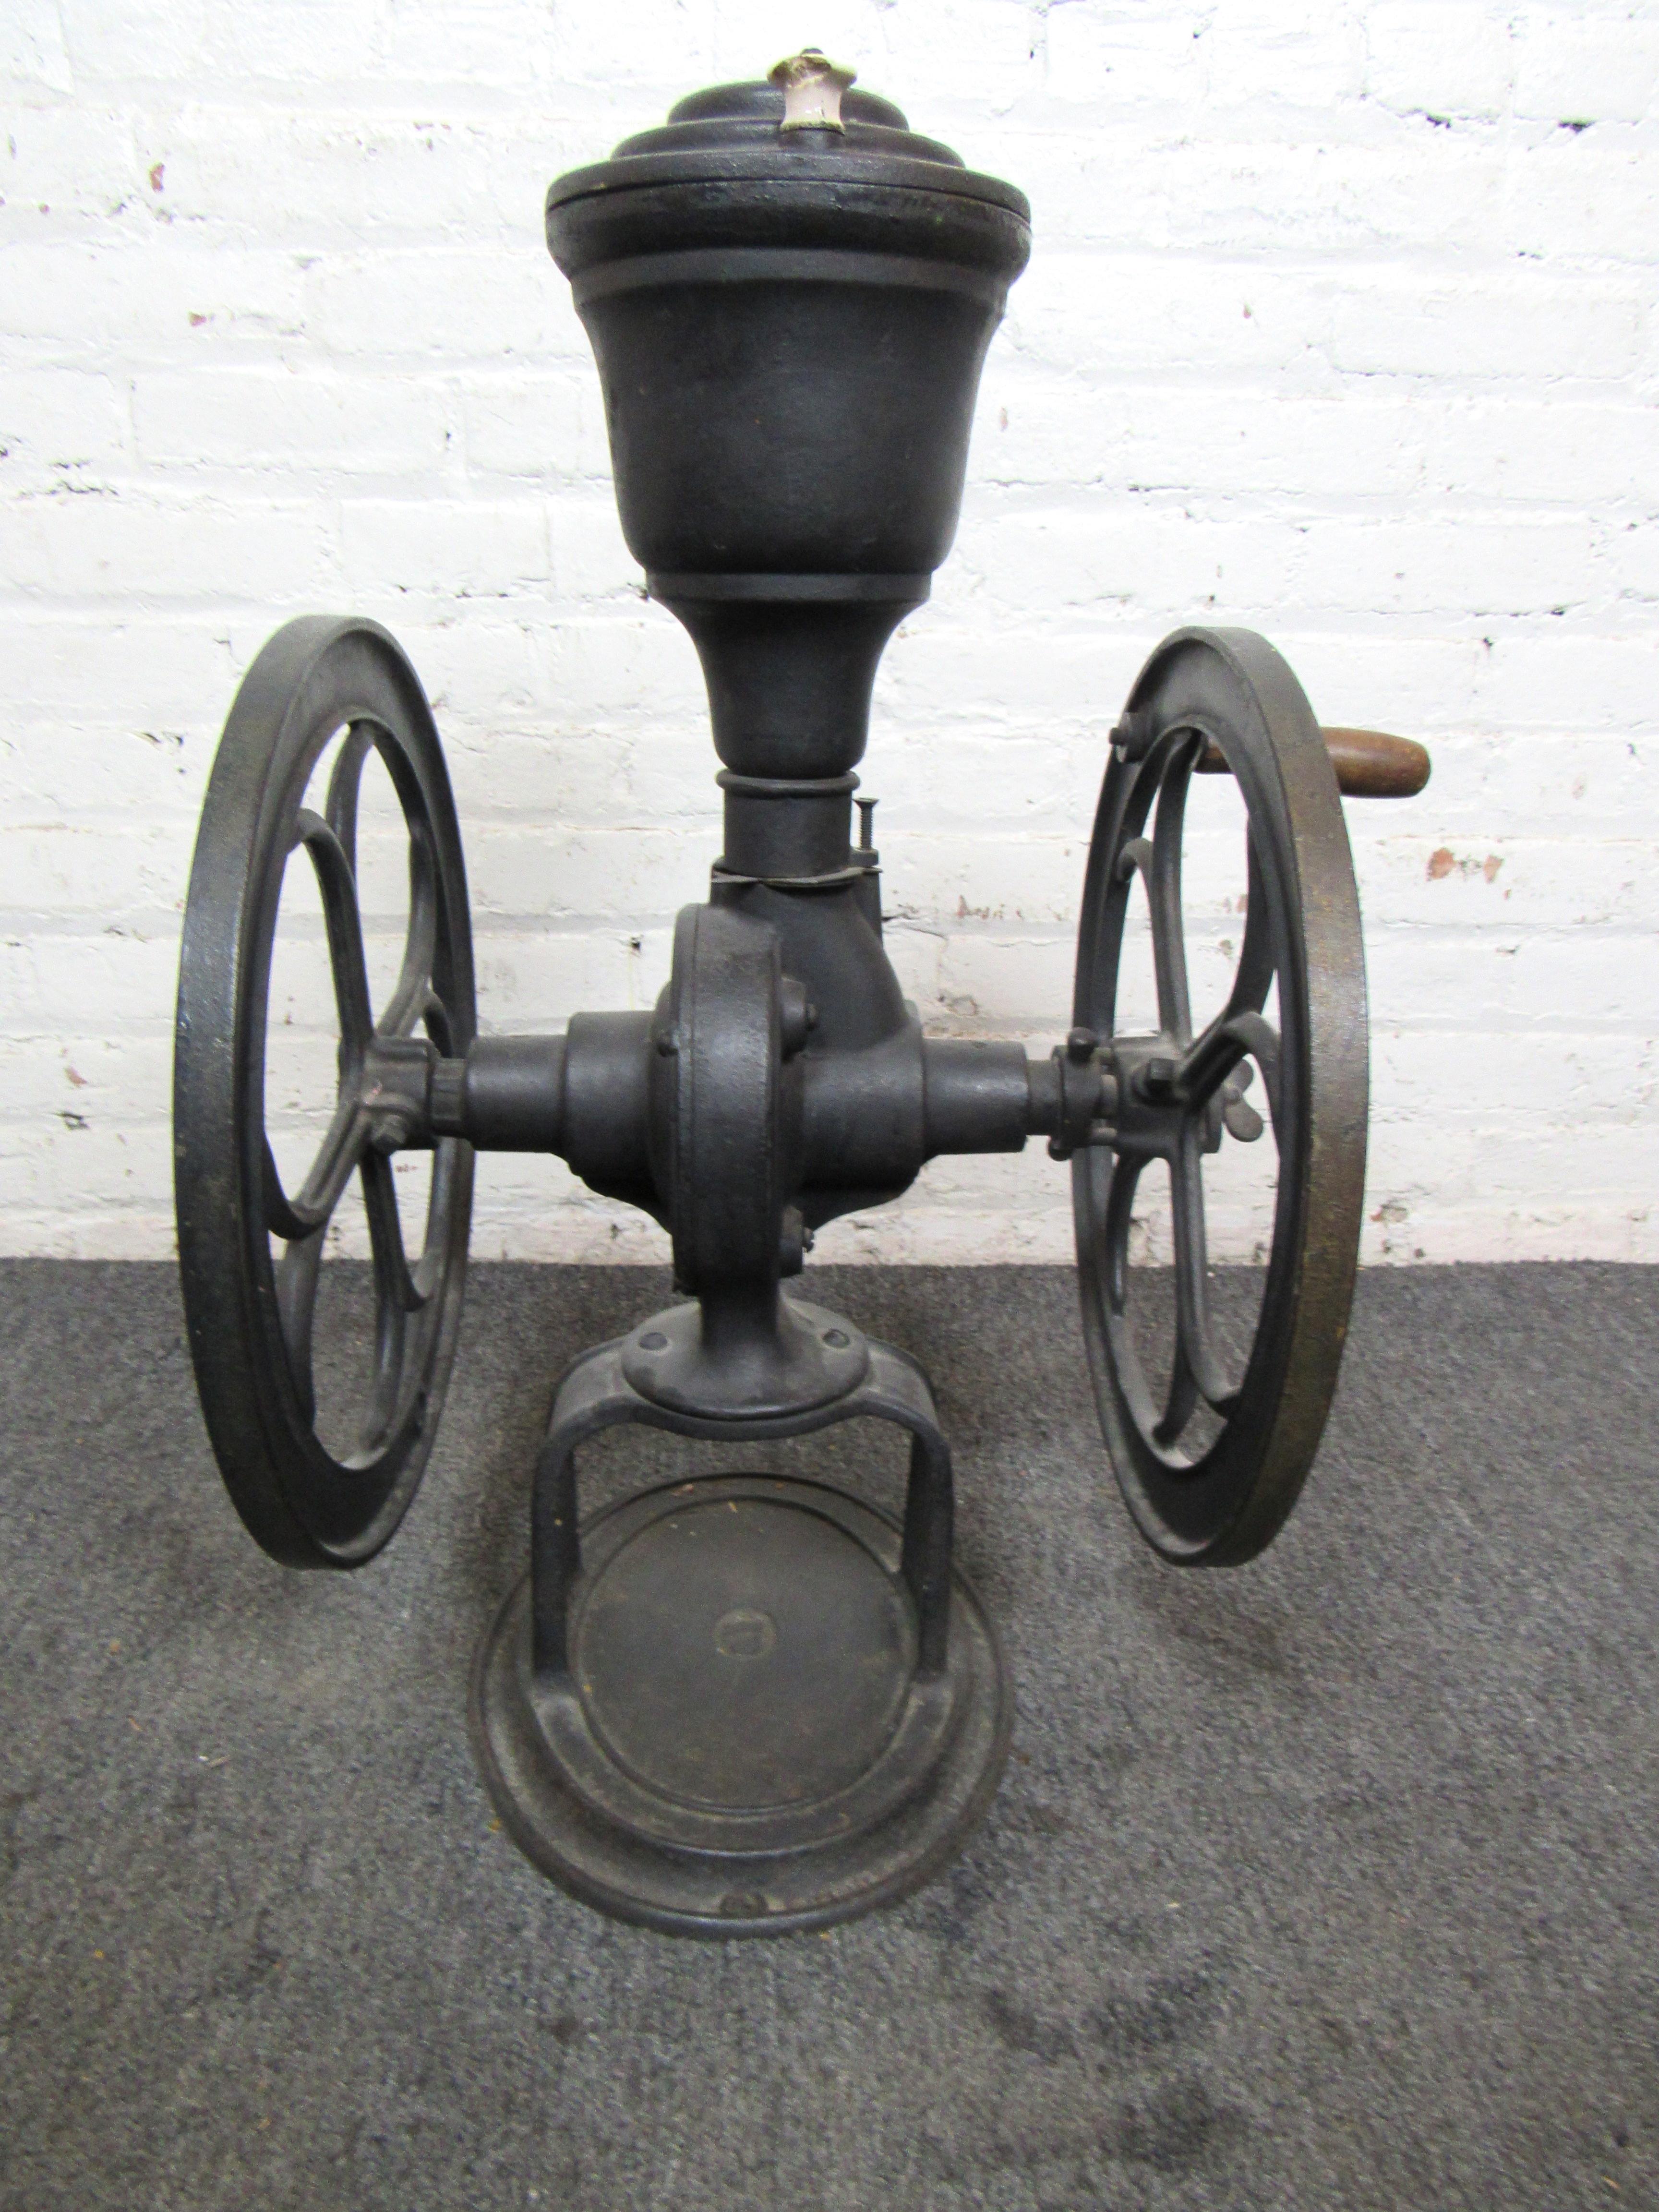 Large iron grinder for coffee stamped with Coles Mfg Co from Philadelphia PA. Makes a great statement piece in a large kitchen or coffee shop.
Please confirm location NY or NJ.